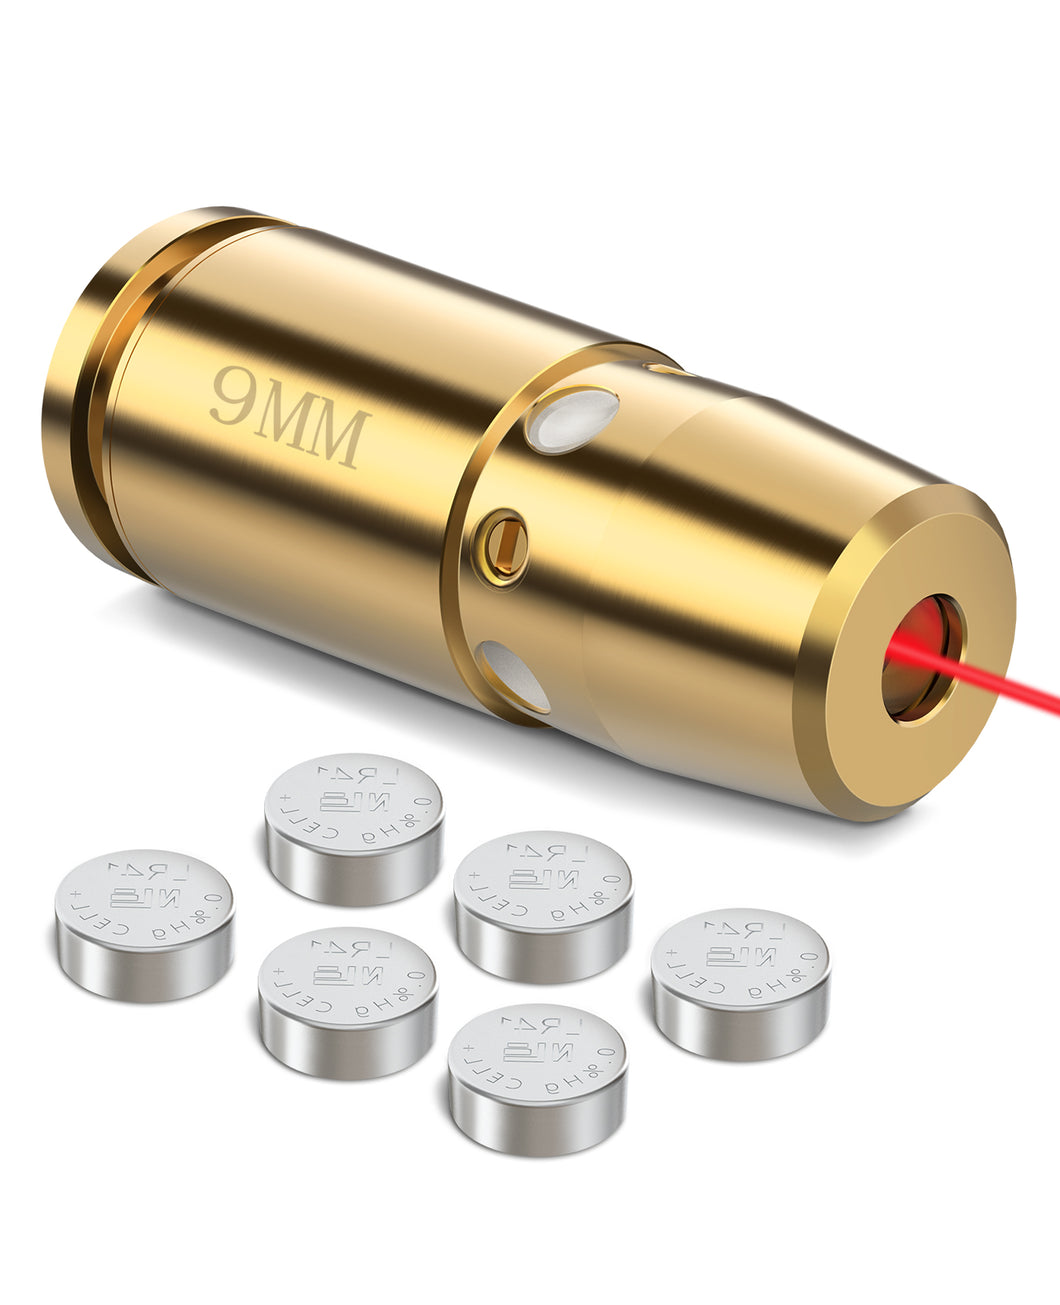 MidTen Bore Sight 9mm Red Laser Boresighter with 6 Batteries